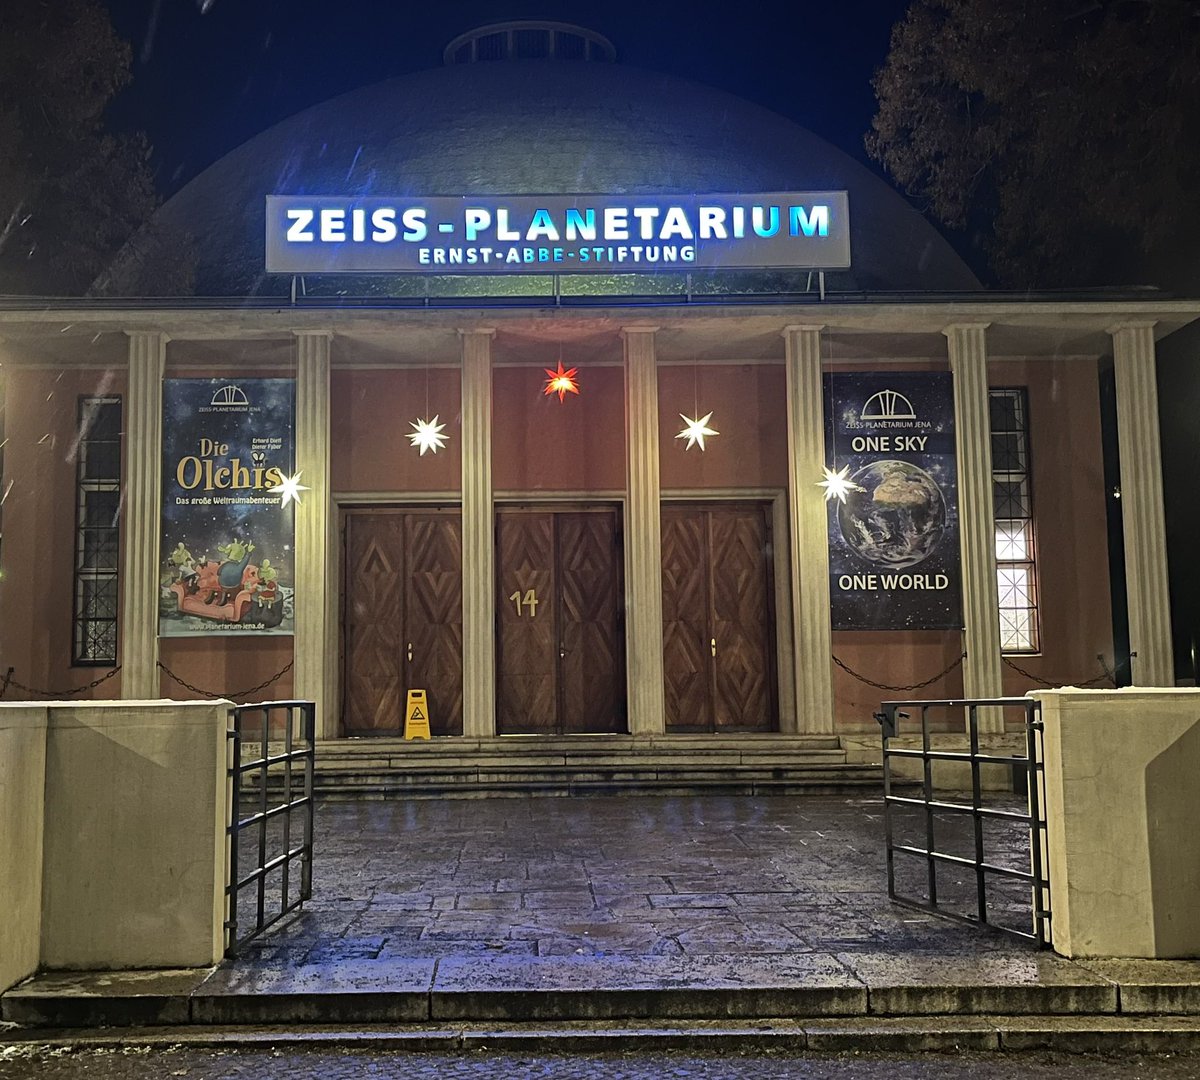 I had my first planetarium visit today and it was really fun. @PlanetariumJena